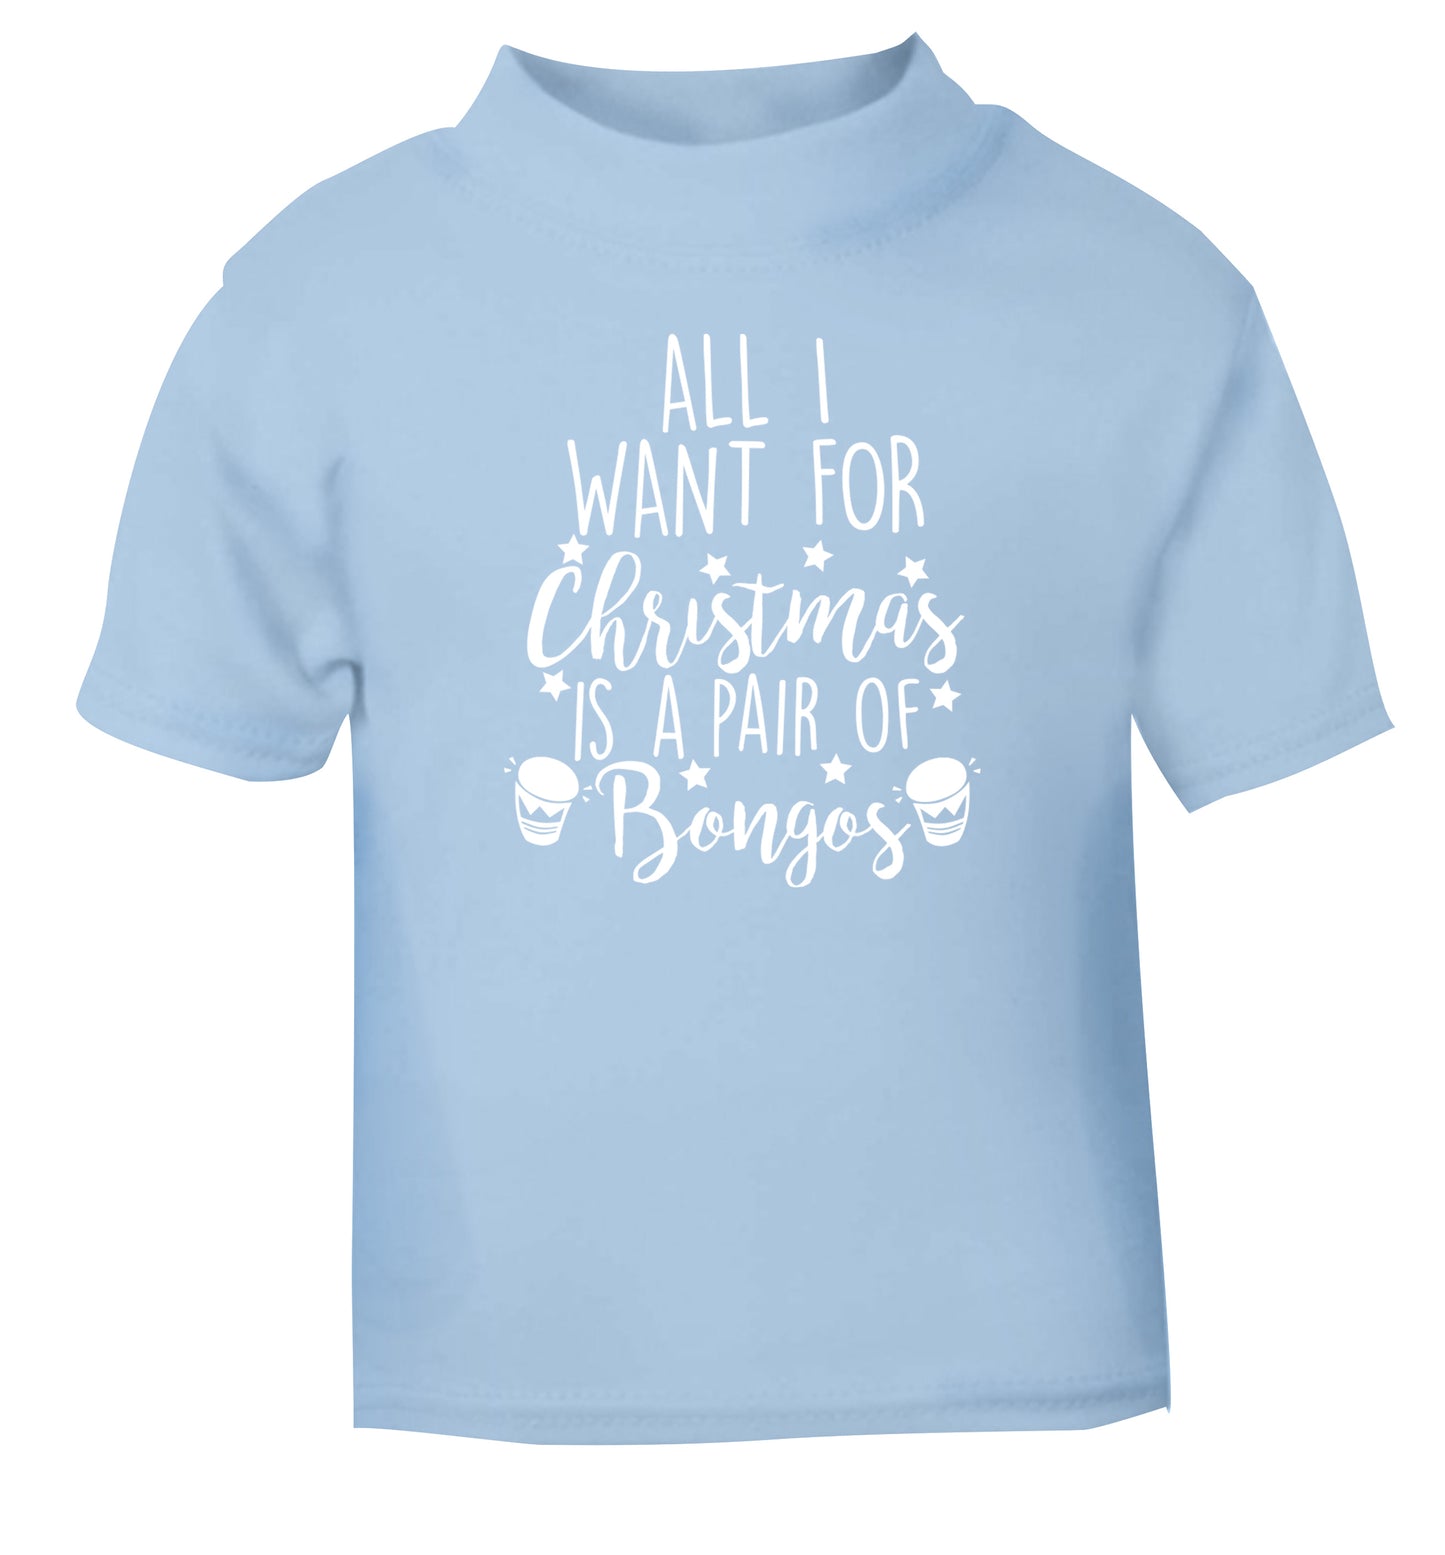 All I want for Christmas is a pair of bongos! light blue Baby Toddler Tshirt 2 Years